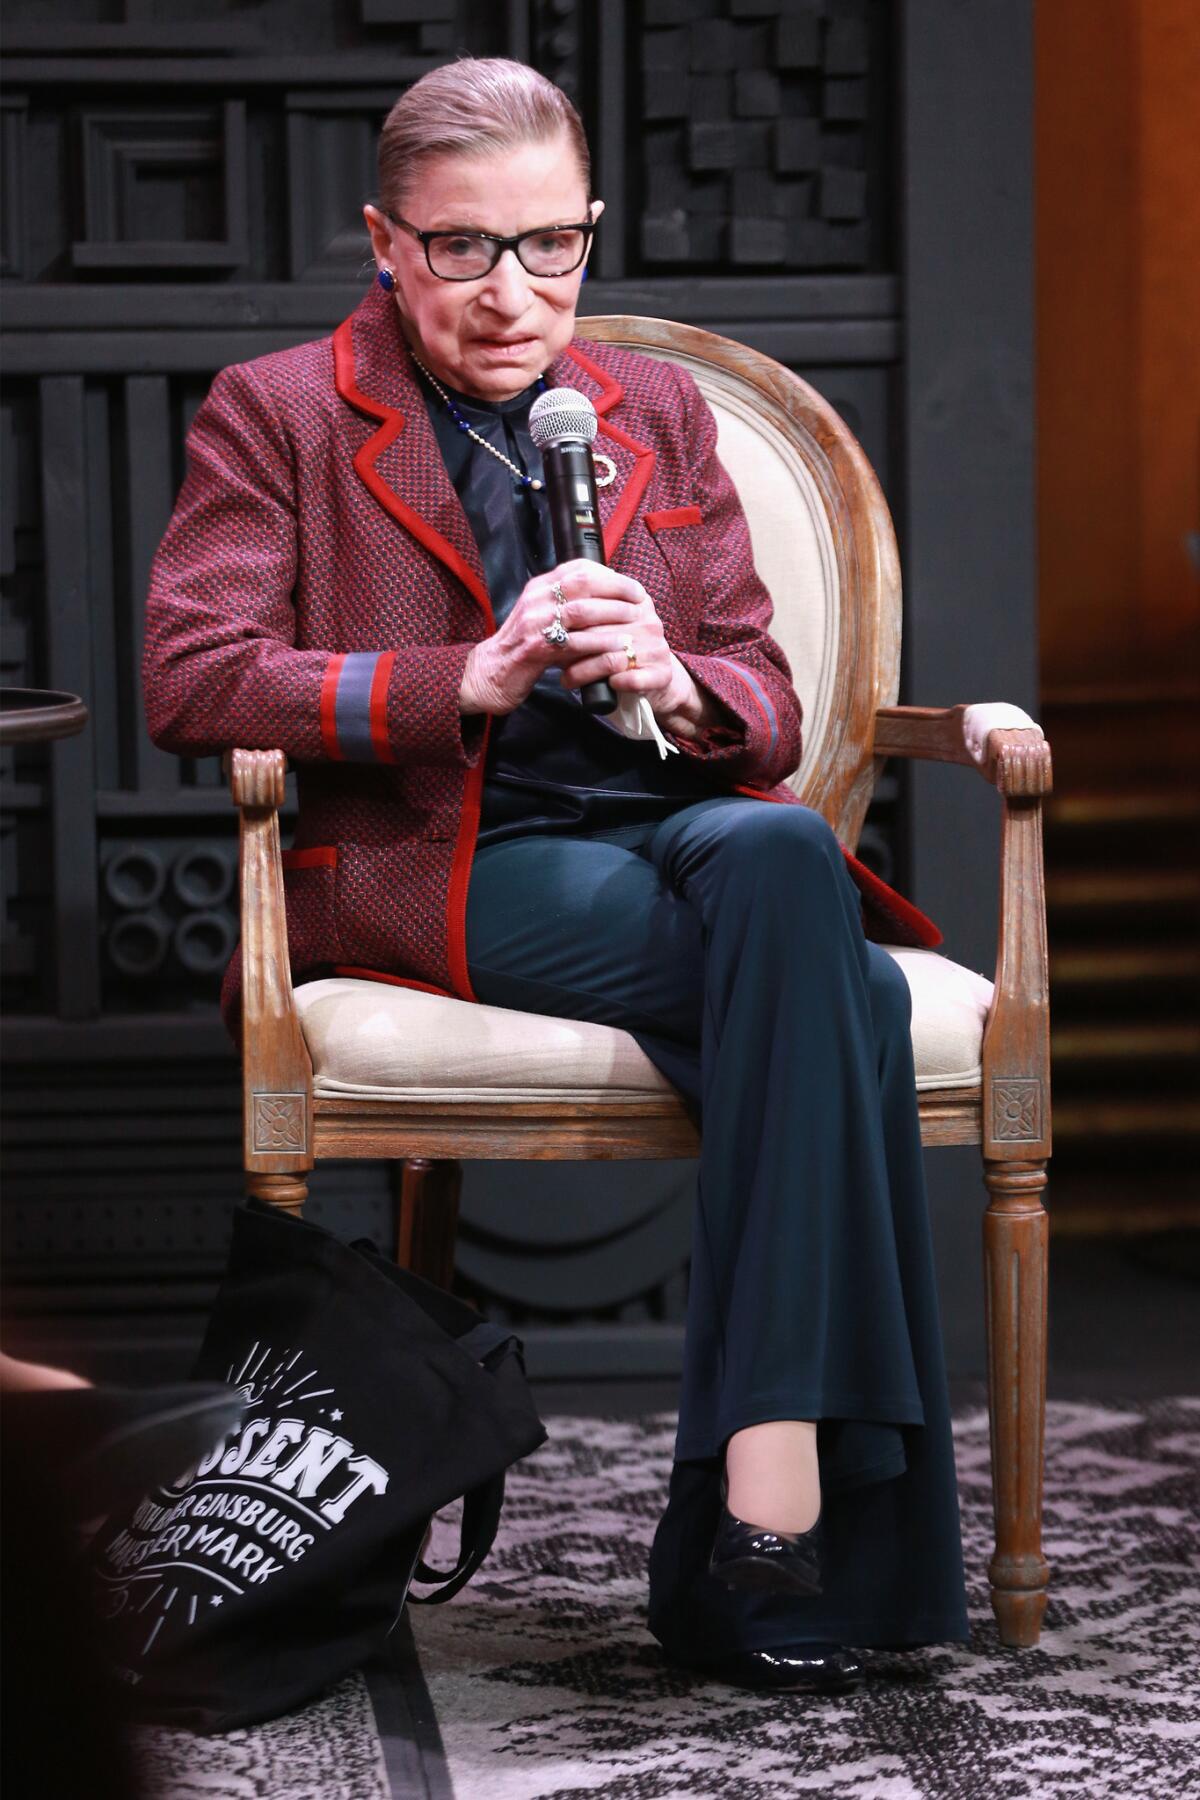 Ruth Bader Ginsburg at Sundance before the premiere of the documentary "RBG."